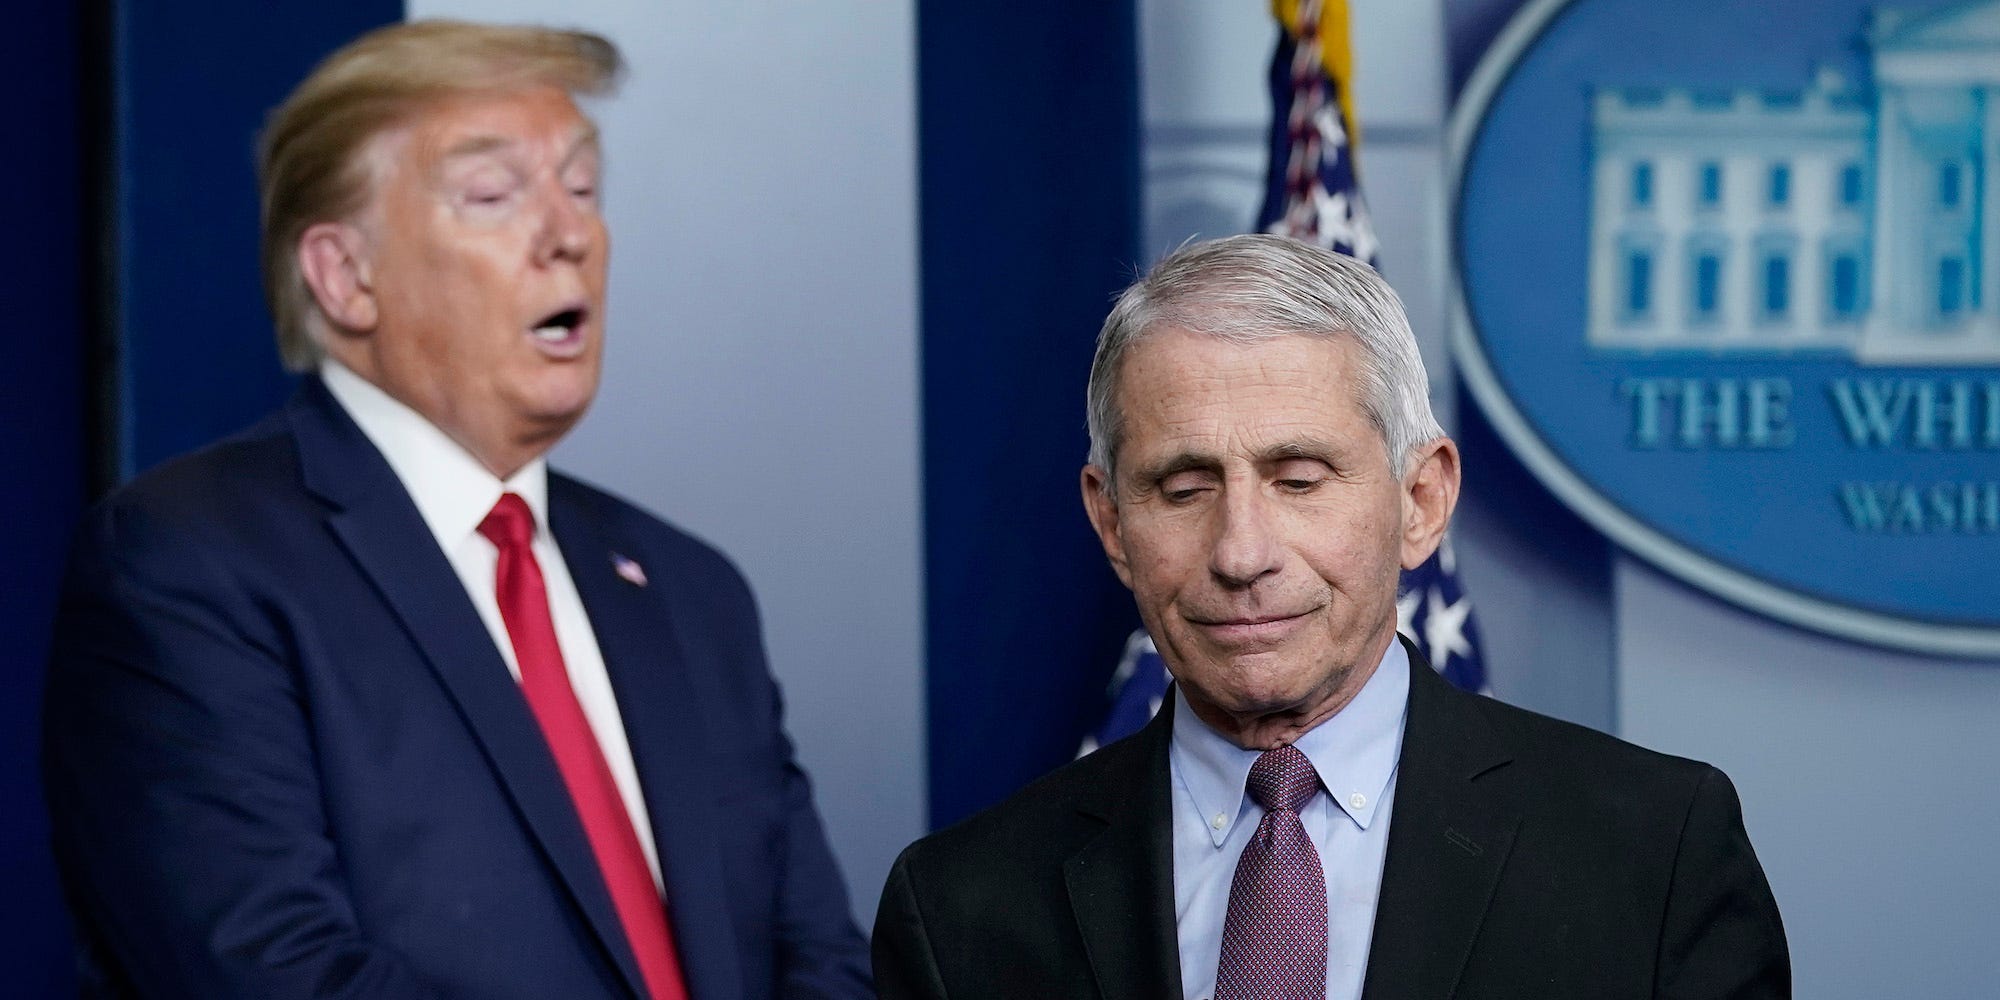 Dr. Anthony Fauci and former President Donald Trump at a coronavirus task force briefing on April 22, 2020.